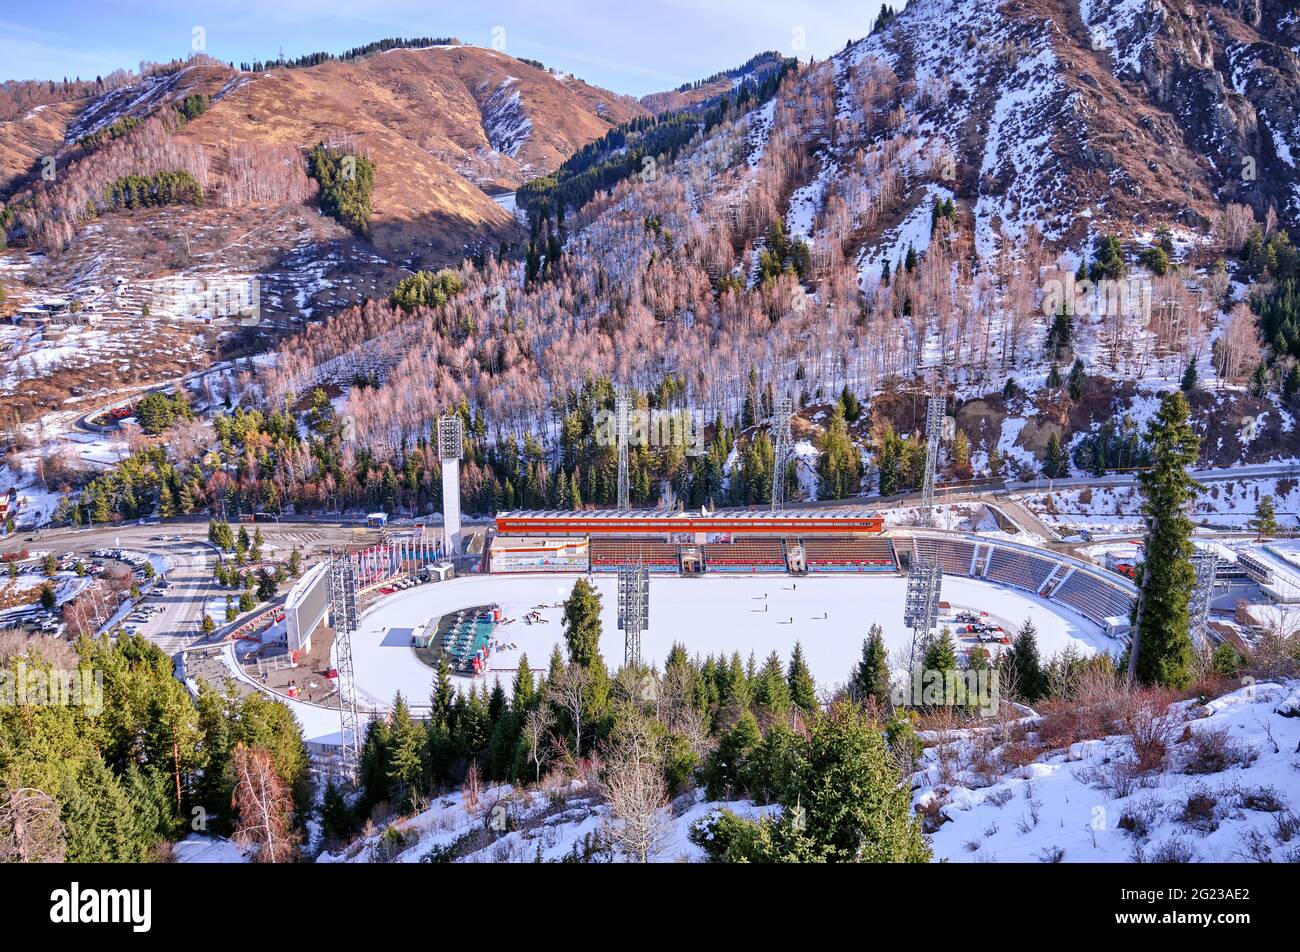 Almaty, Kazakhstan - February 05, 2021: Medeo valley with an ice skating rink of the same name in winter season Stock Photo